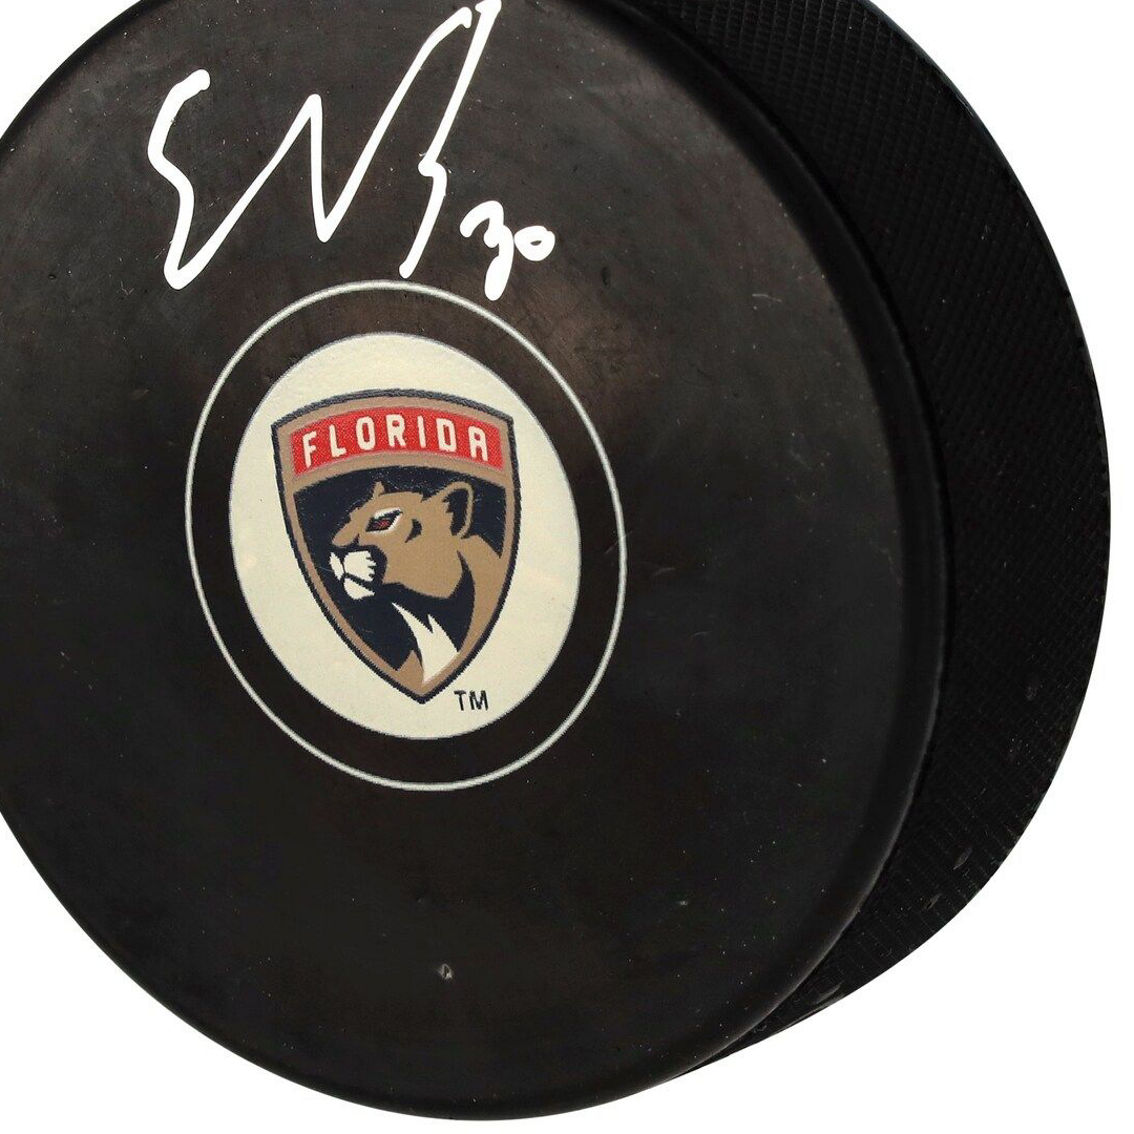 Fanatics Authentic Spencer Knight Florida Panthers Autographed Hockey Puck - Image 2 of 3